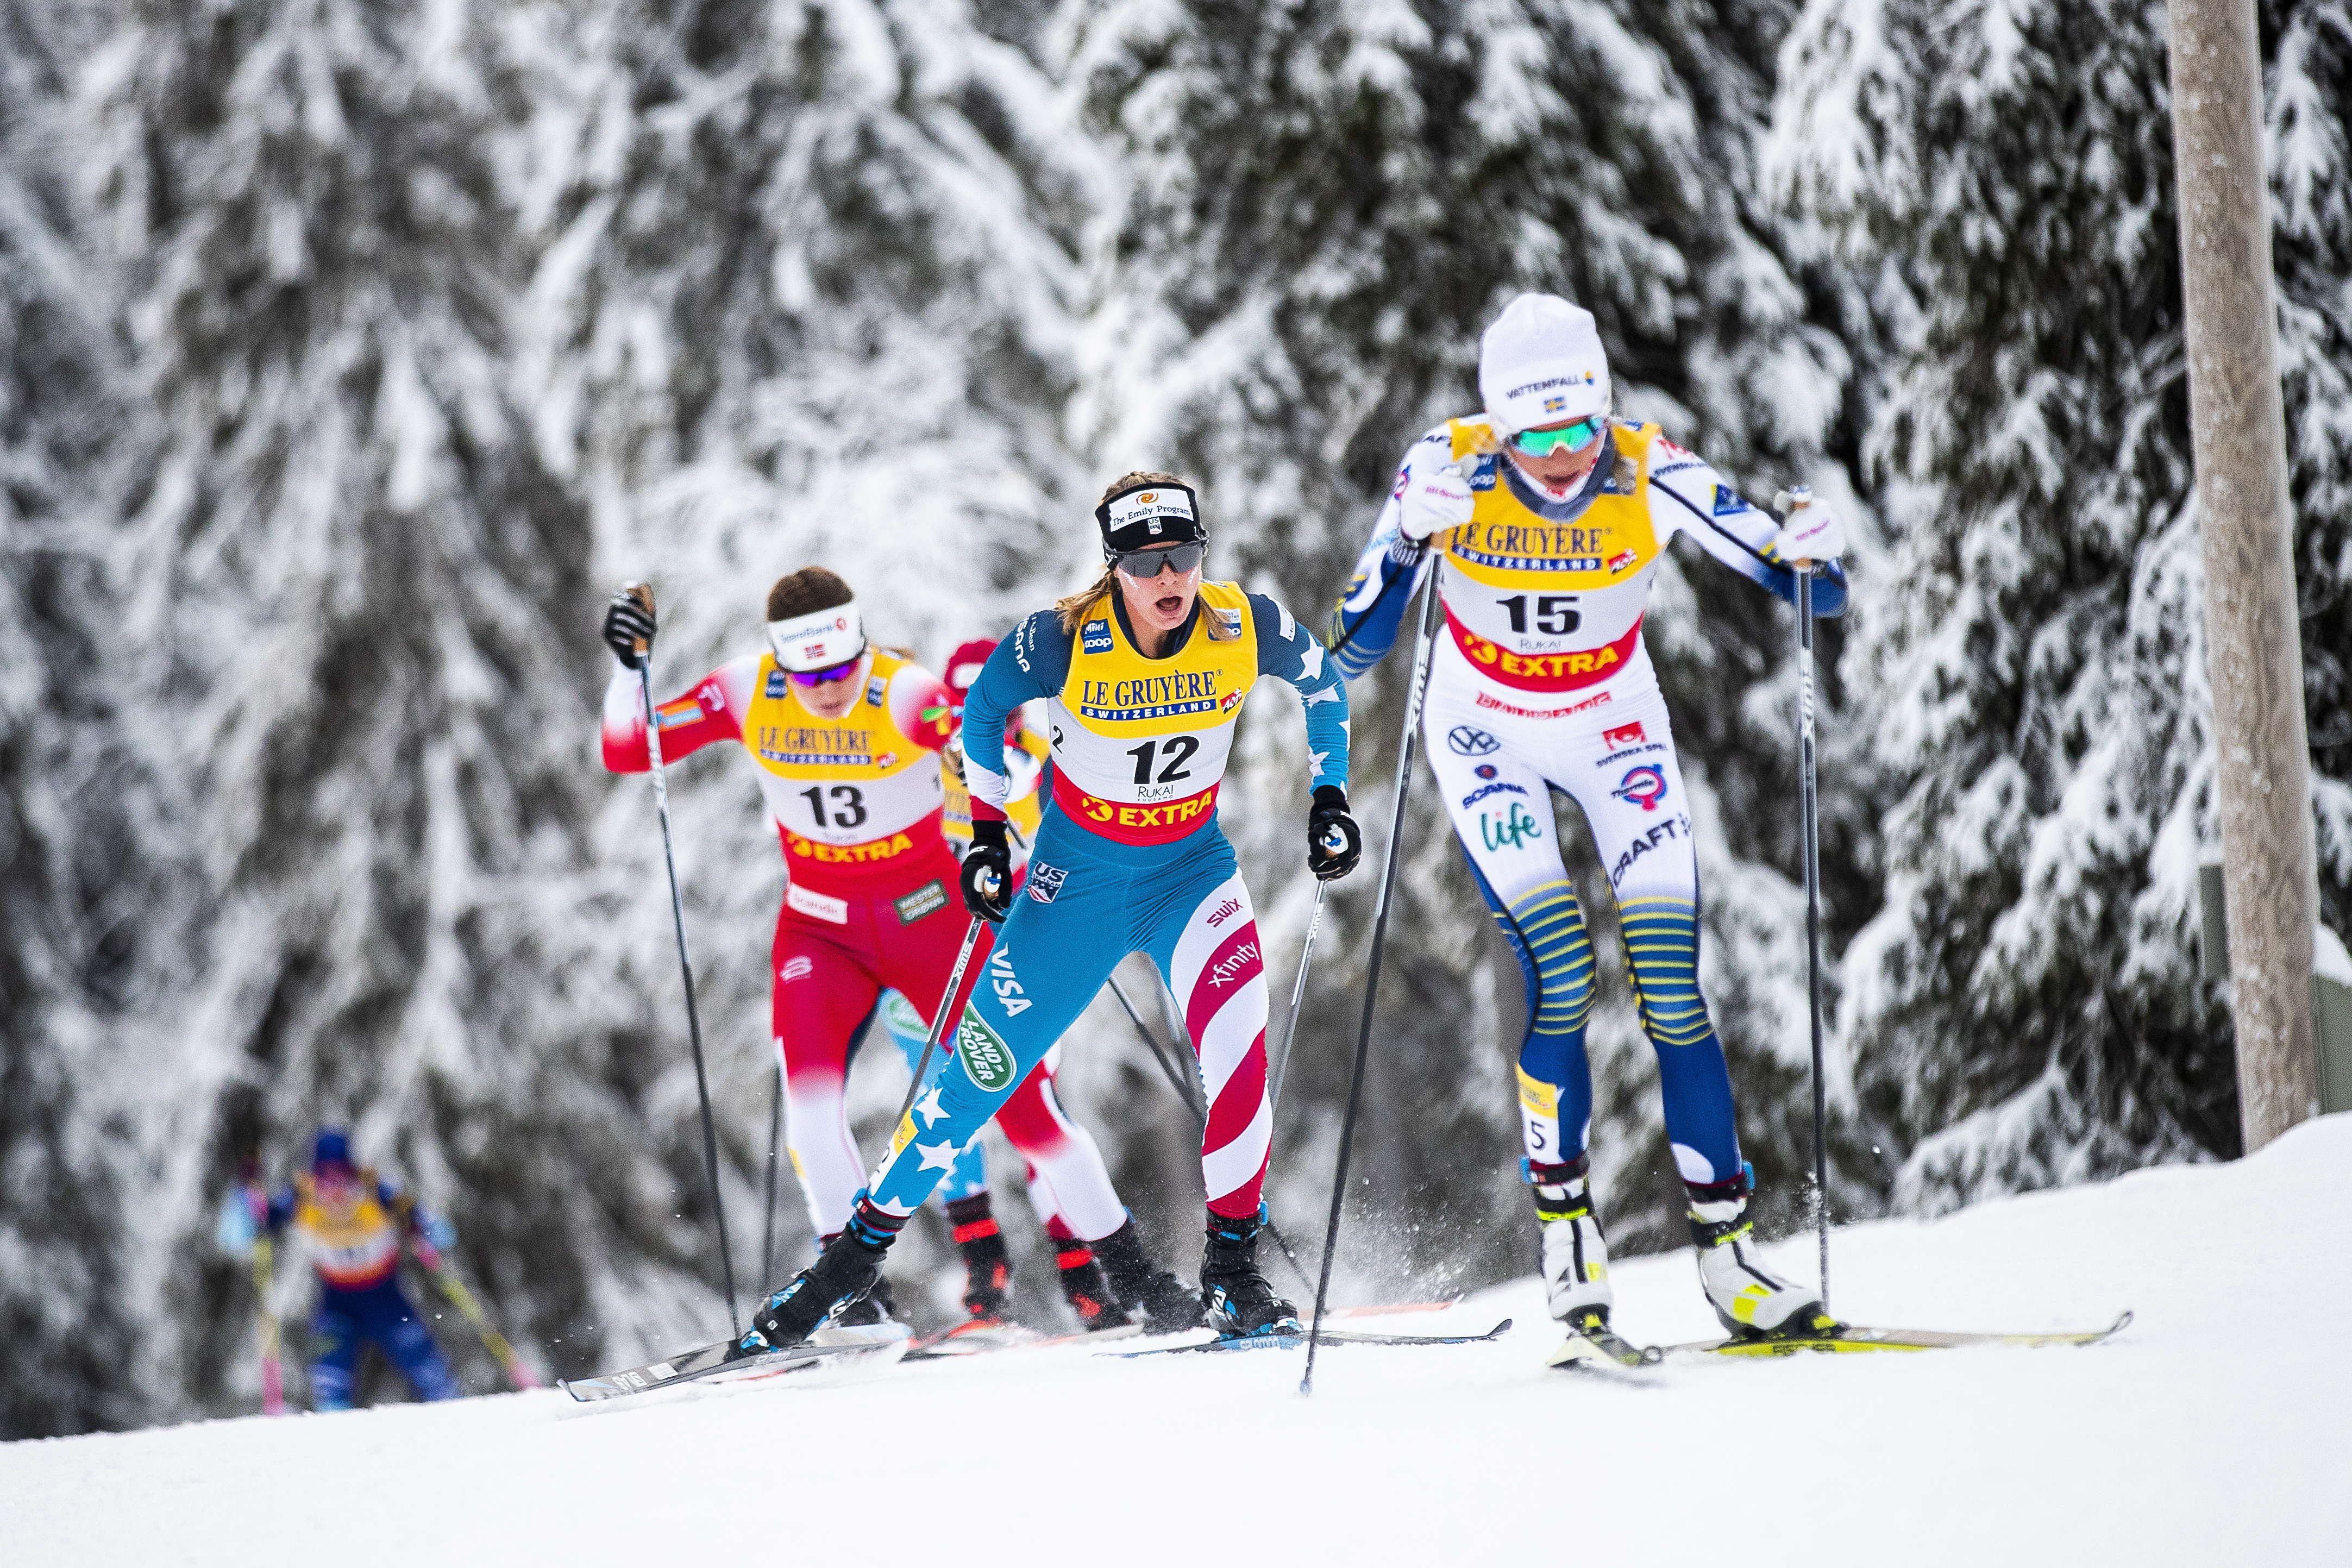 Watching the FIS Cross-country World Cup for 2020-2021 in the U.S